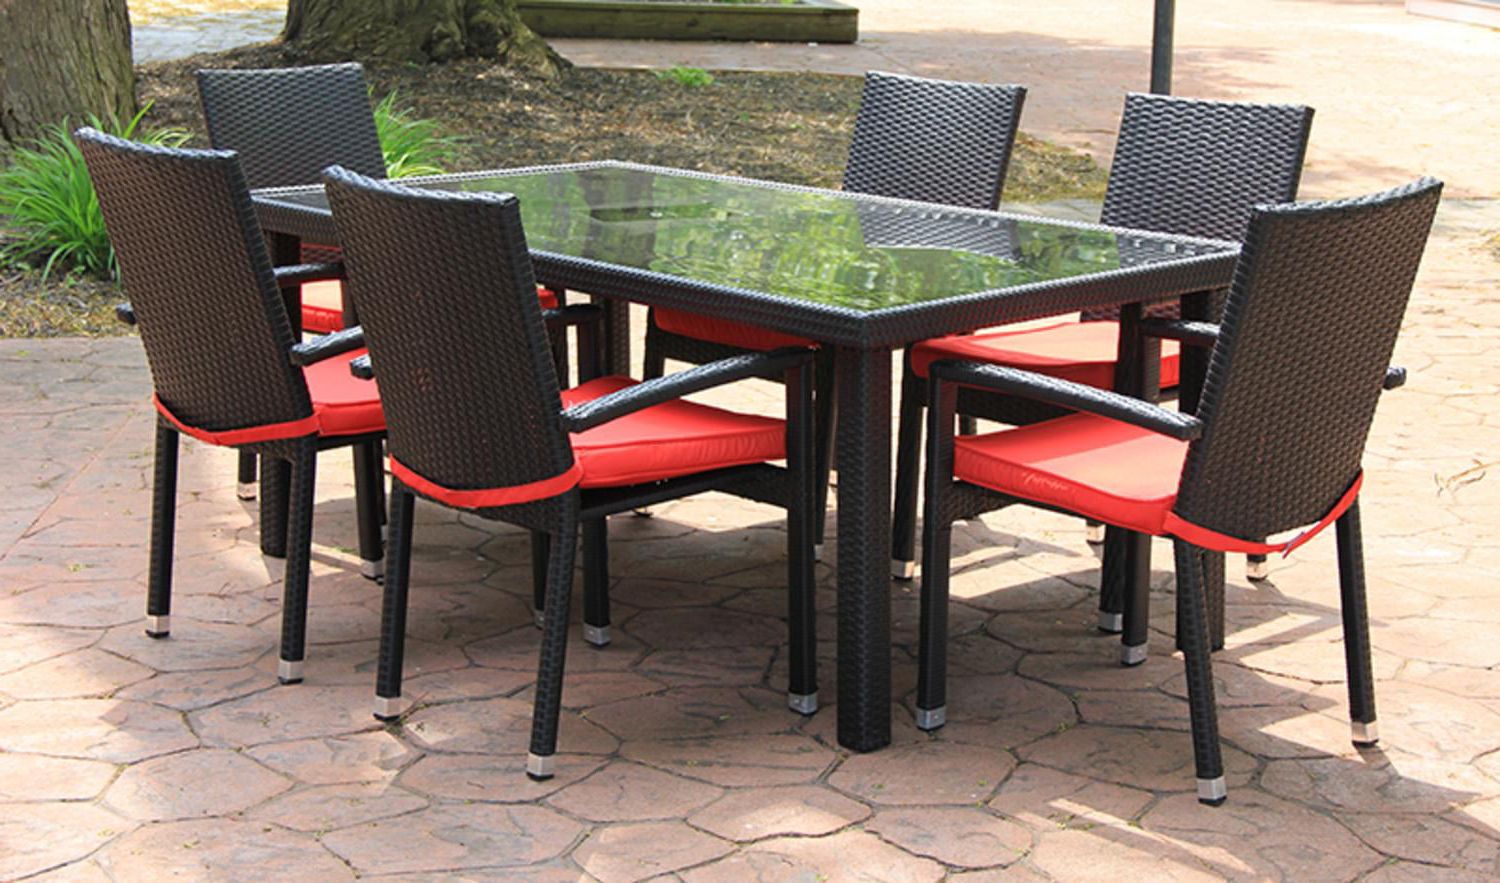 Most Popular 7 Piece Black Resin Wicker Outdoor Furniture Patio Dining Set – Red For Black Outdoor Dining Modern Chairs Sets (View 12 of 15)